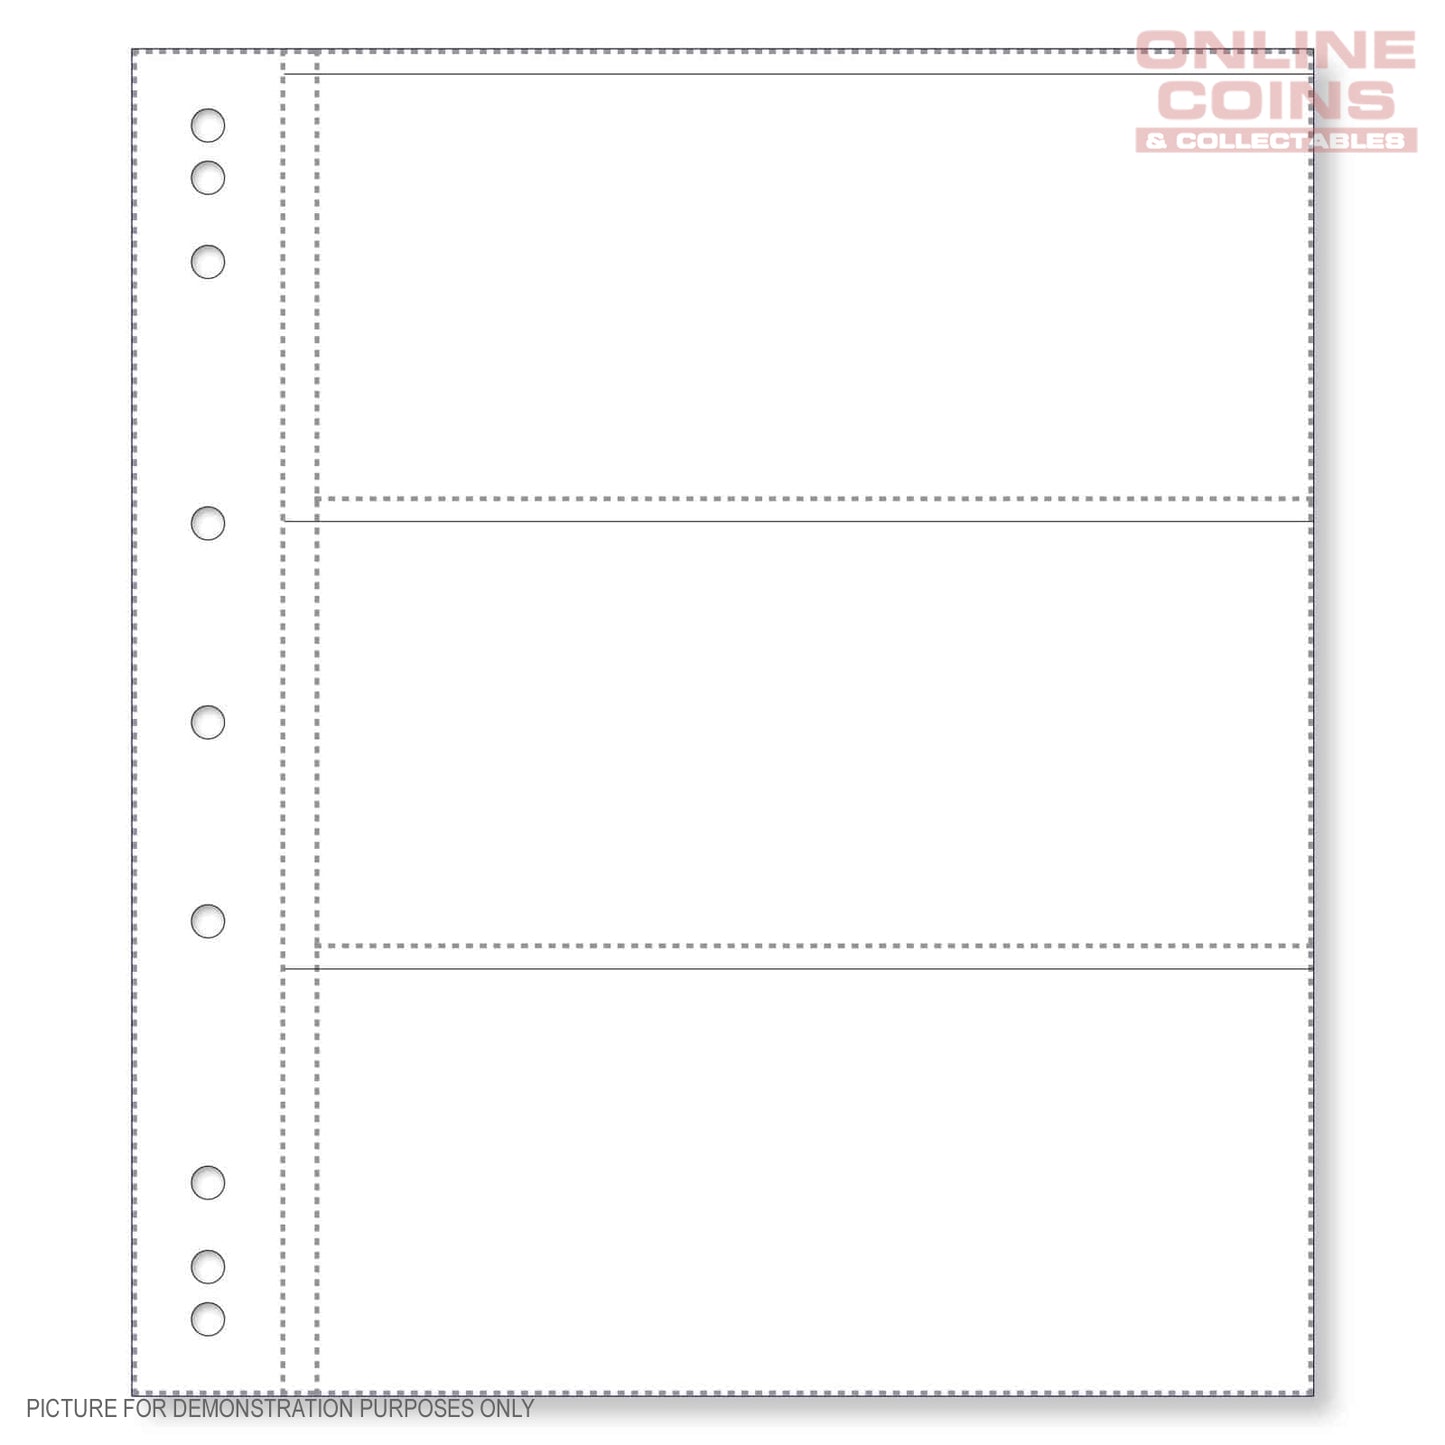 Renniks Banknote Album Plastic Refill Pages - 3 Pockets - Pack of 10